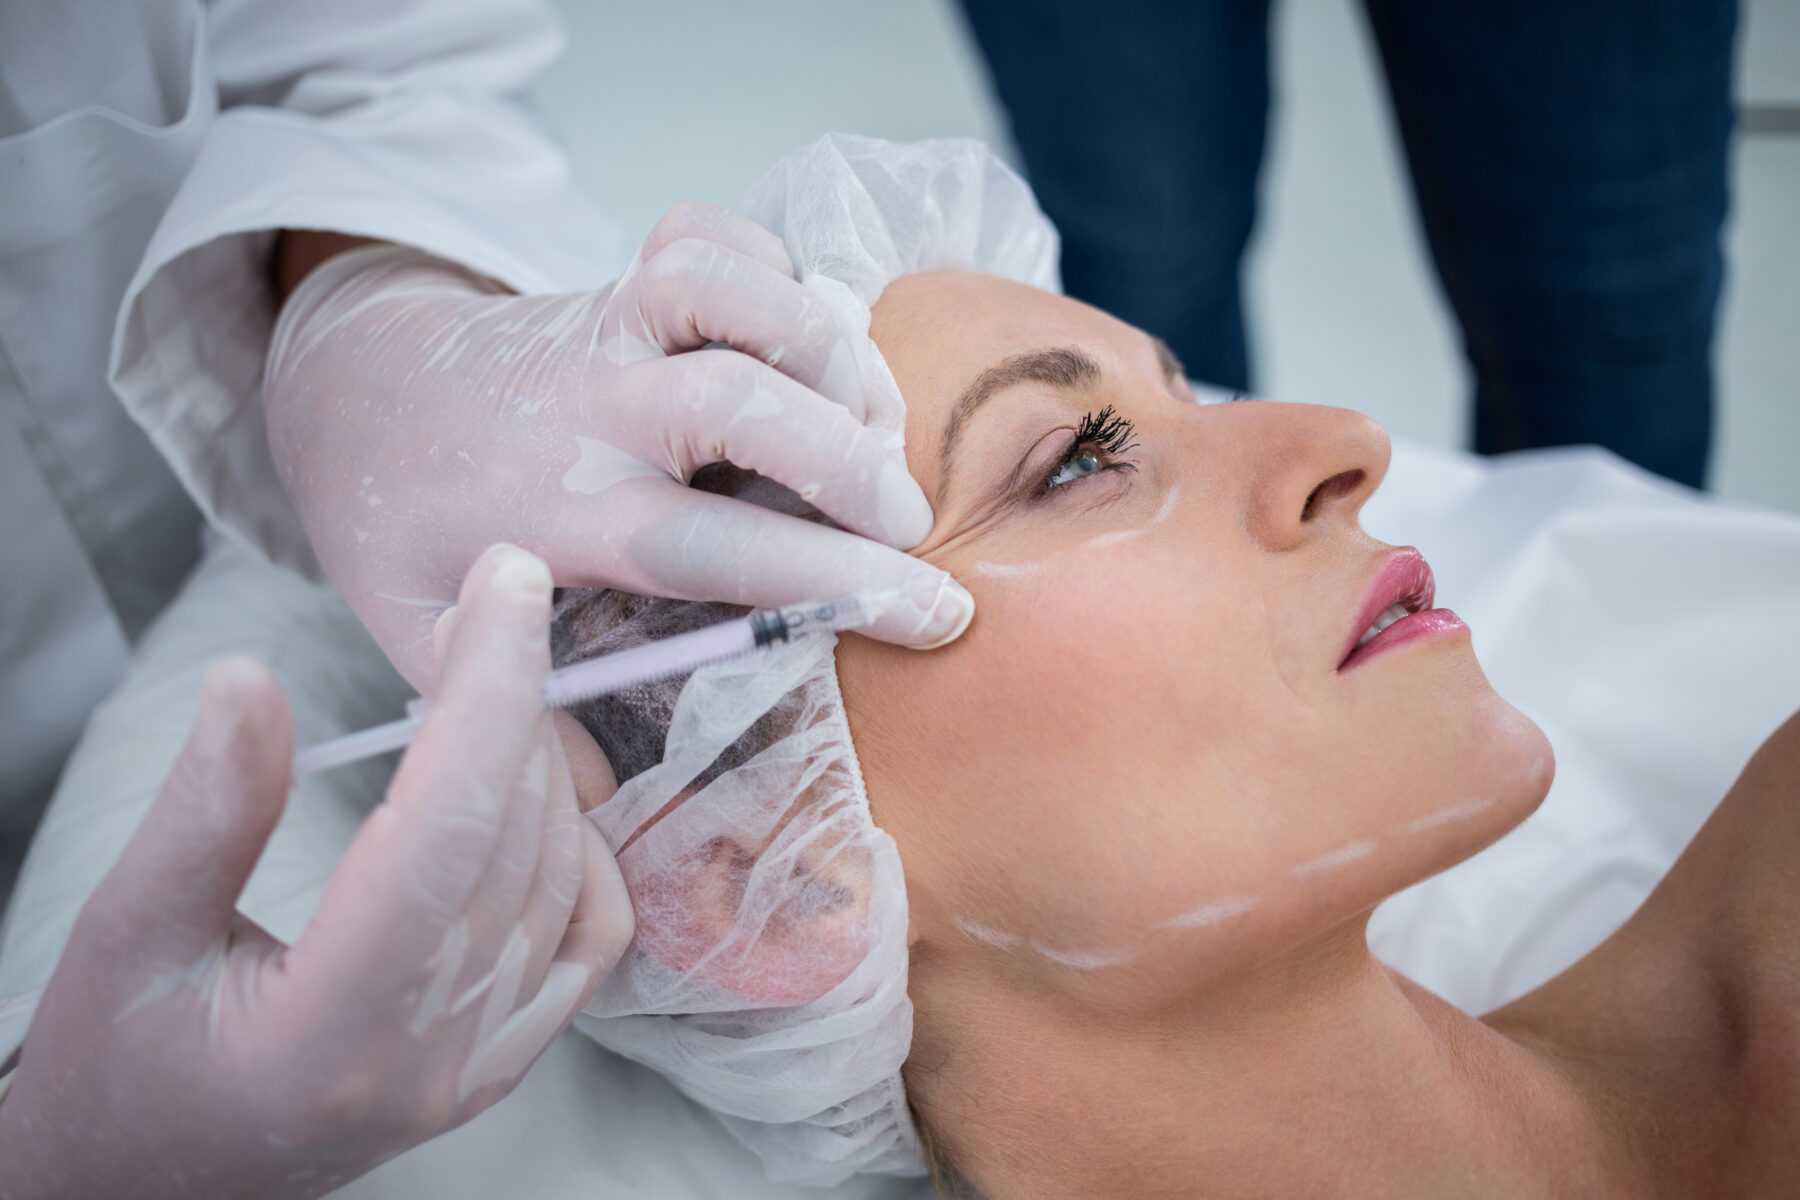 Woman With Marked Face Receiving Botox Injection